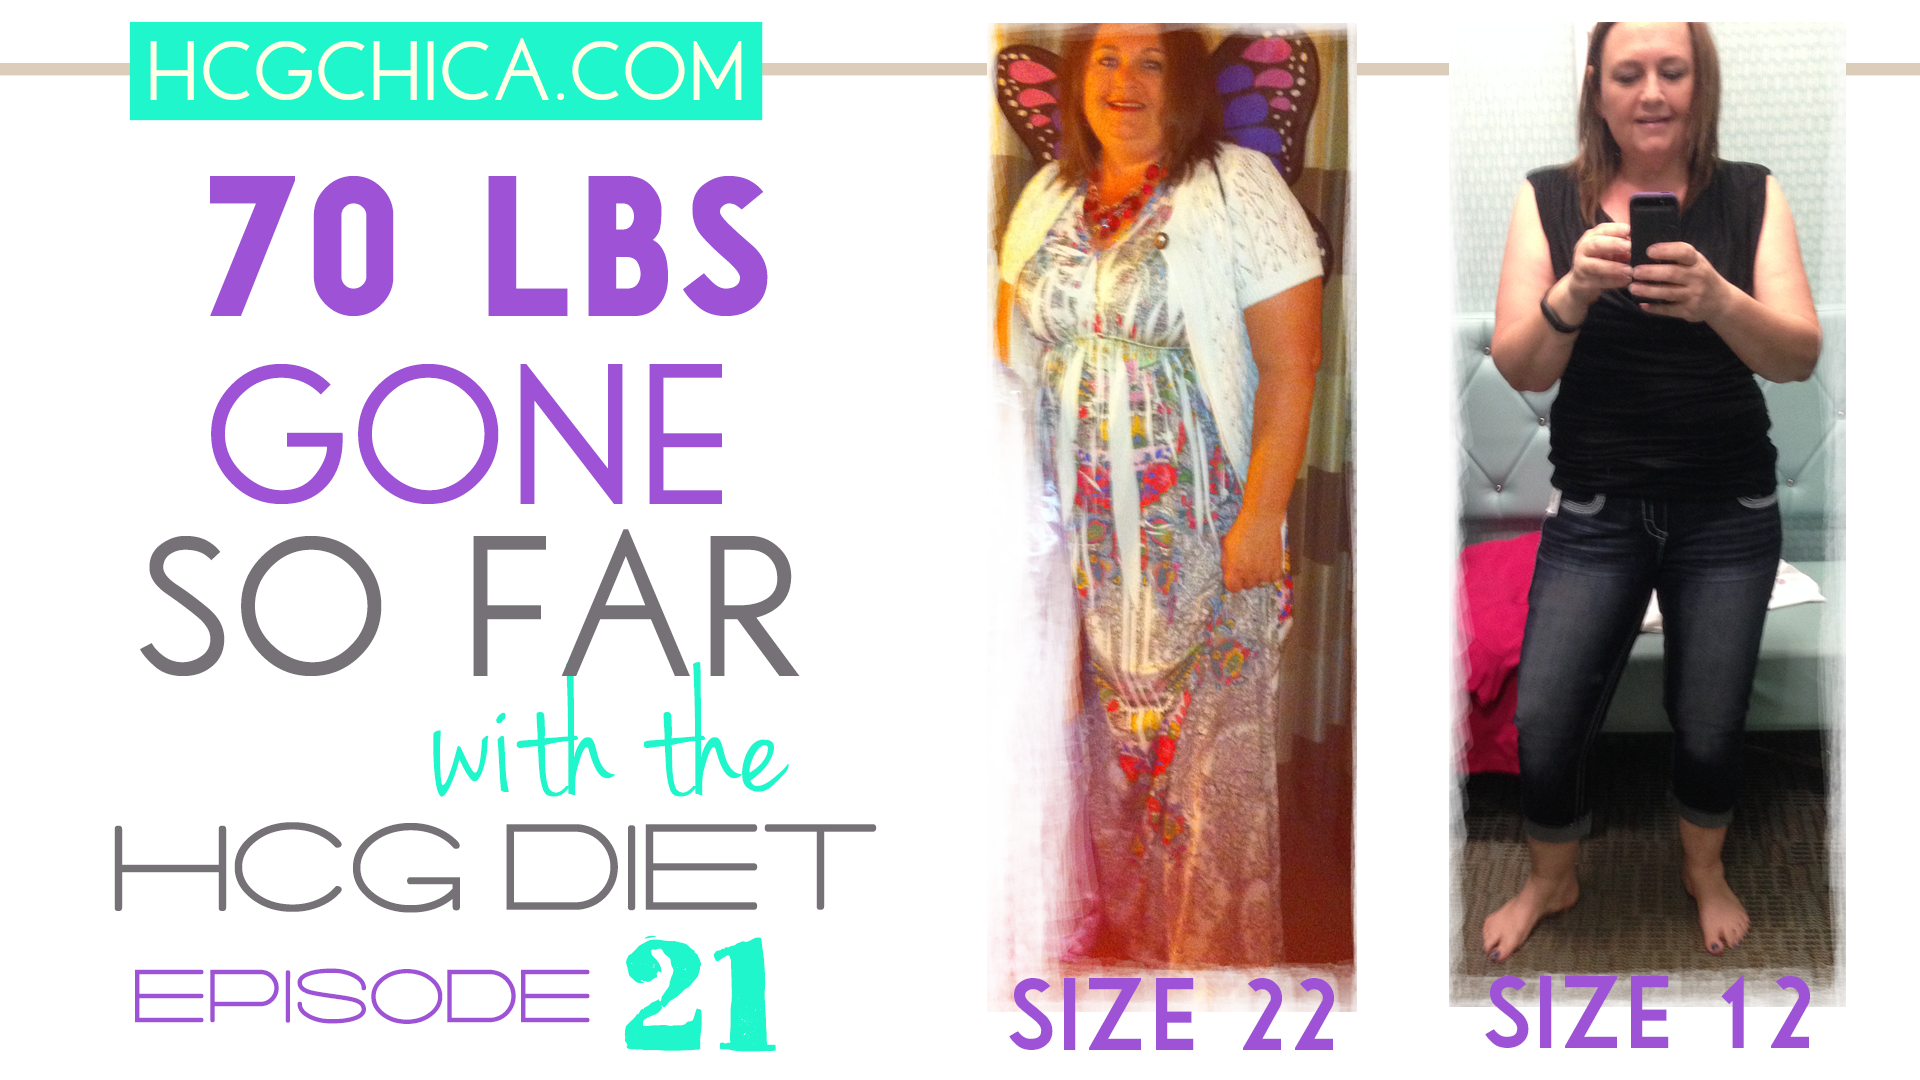 Episode 21 of the hCG Diet Interviews - 70 lbs gone so far - Size 22 to Size 12 - hcgchica.com